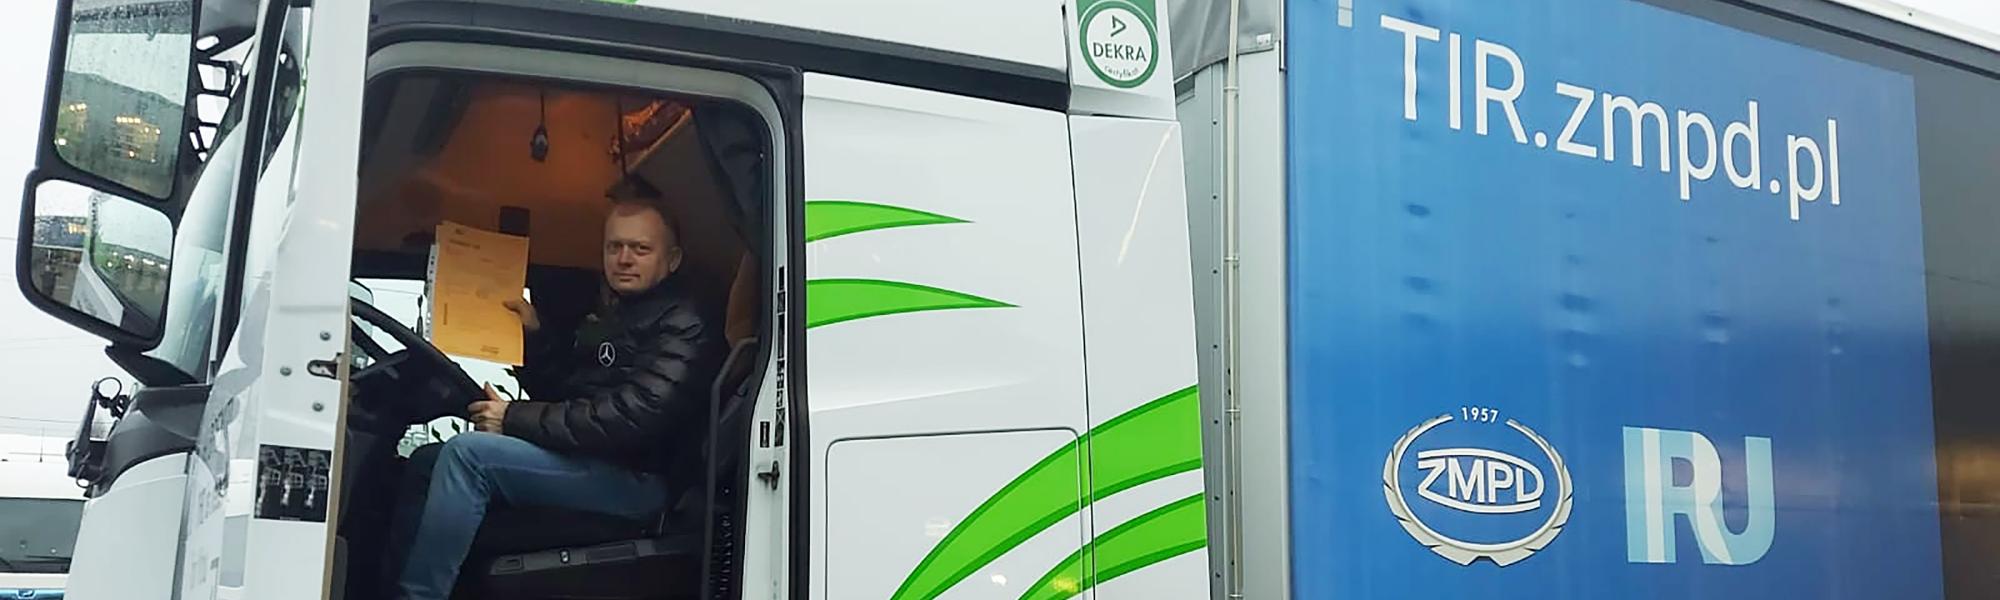 Polish haulier demonstrates TIR as solution for Brexit customs woes